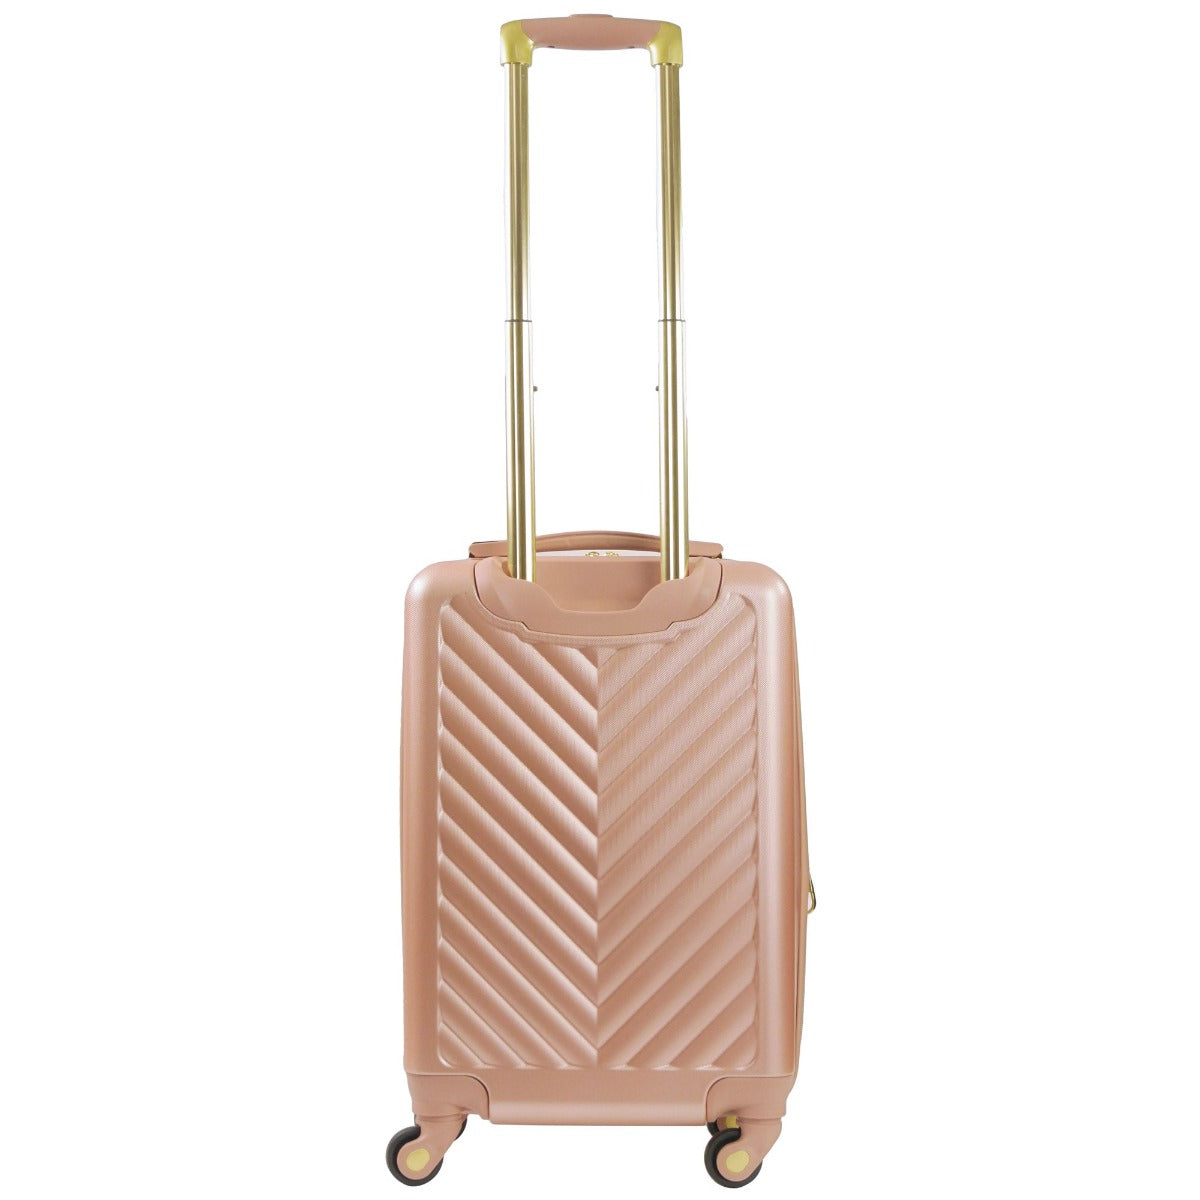 Christian Siriano Addie 22" hardside spinner luggage rose gold - best suitcase for travelling adults and kids